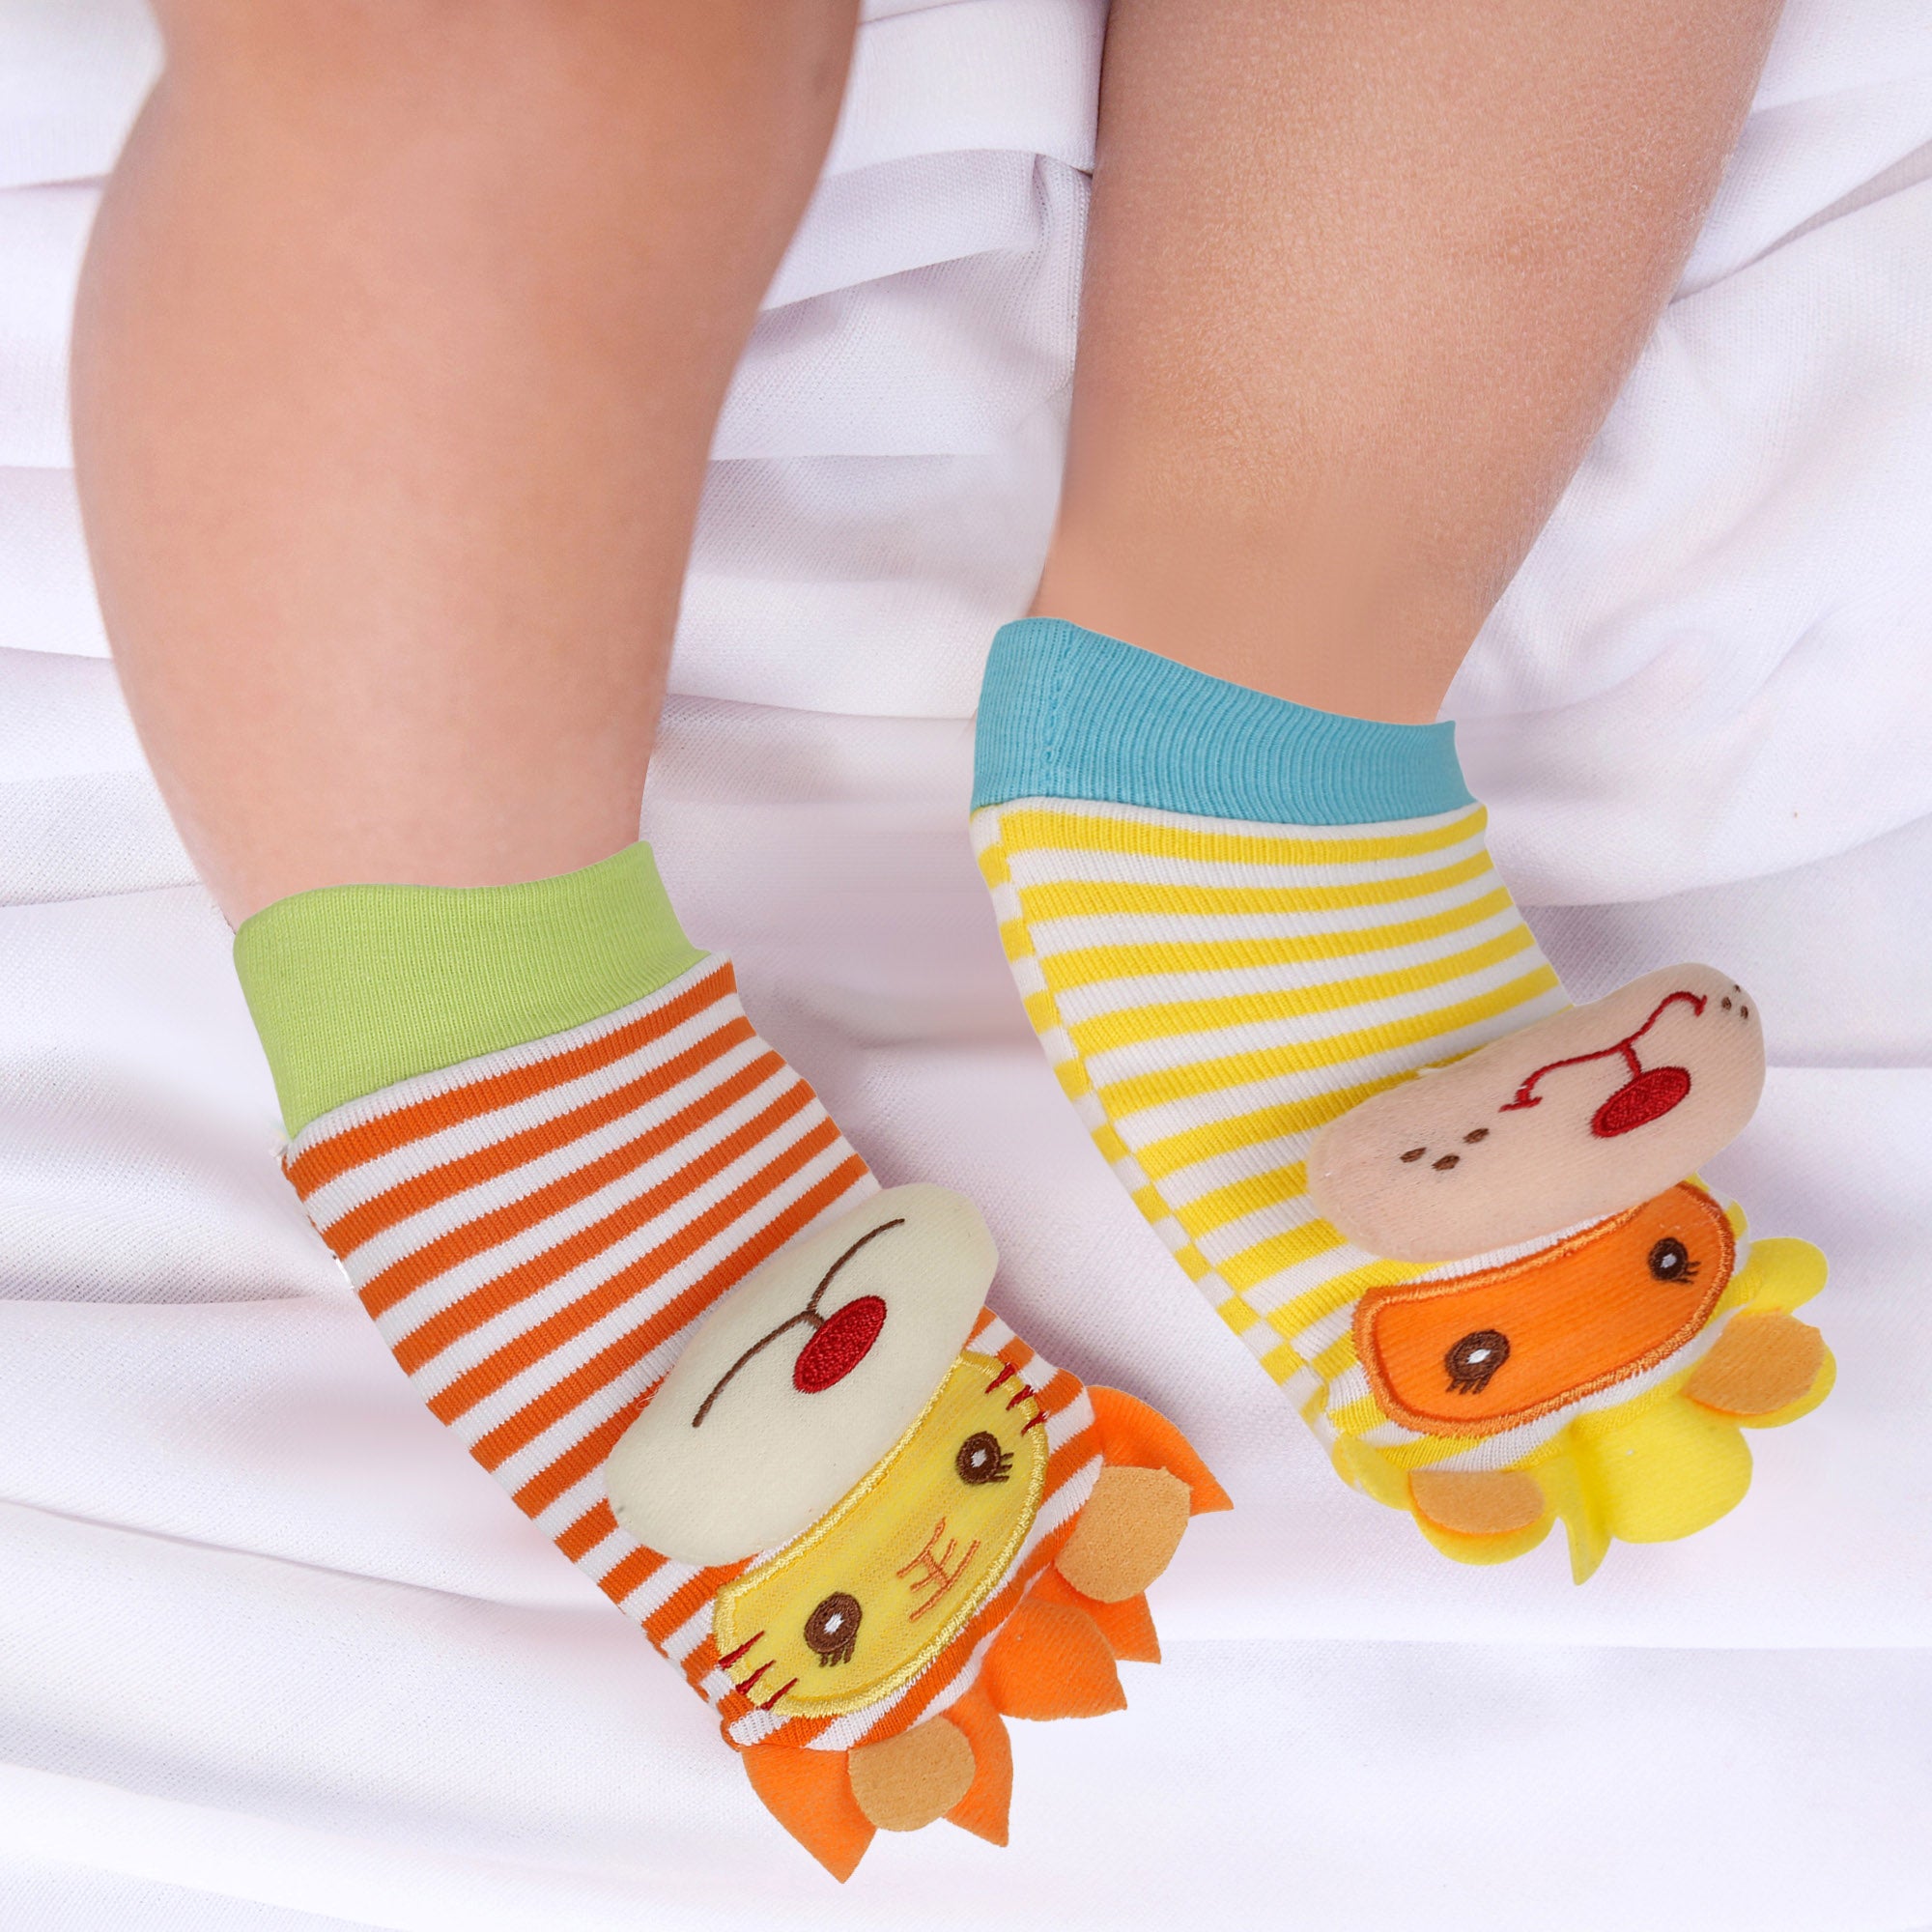 Baby Moo Wild Cats Multicolour Set of 4 Socks And Wrist Rattle